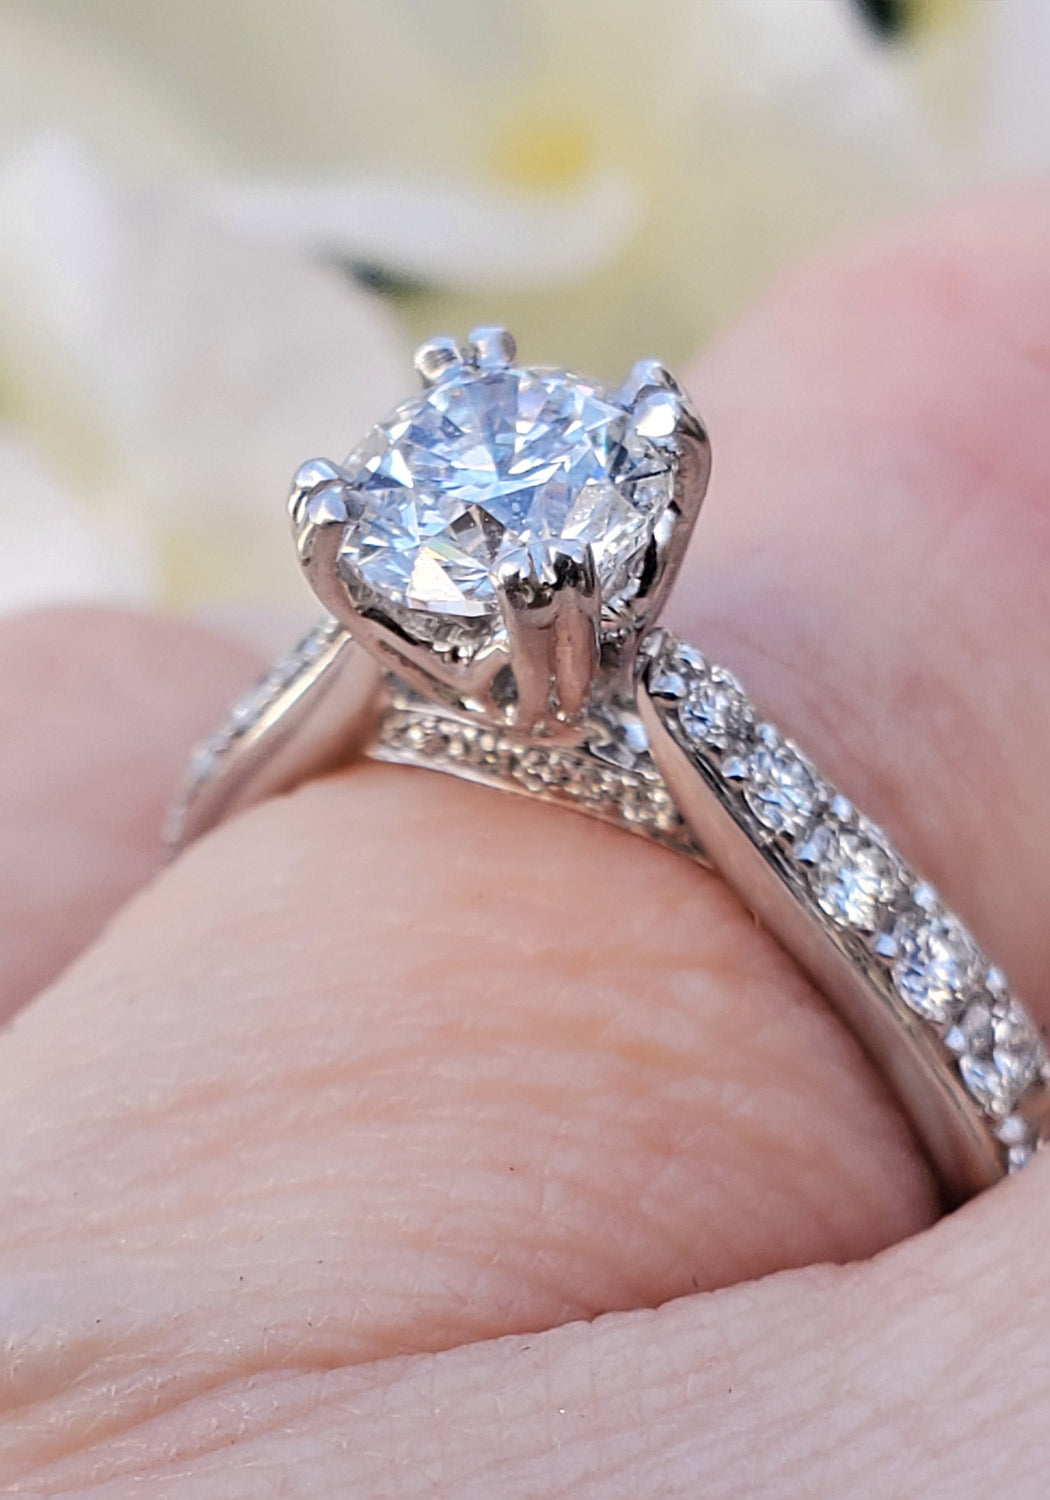 Beautifully raised solitaire diamond ring at Oster Jewelers | OsterJewelers.com